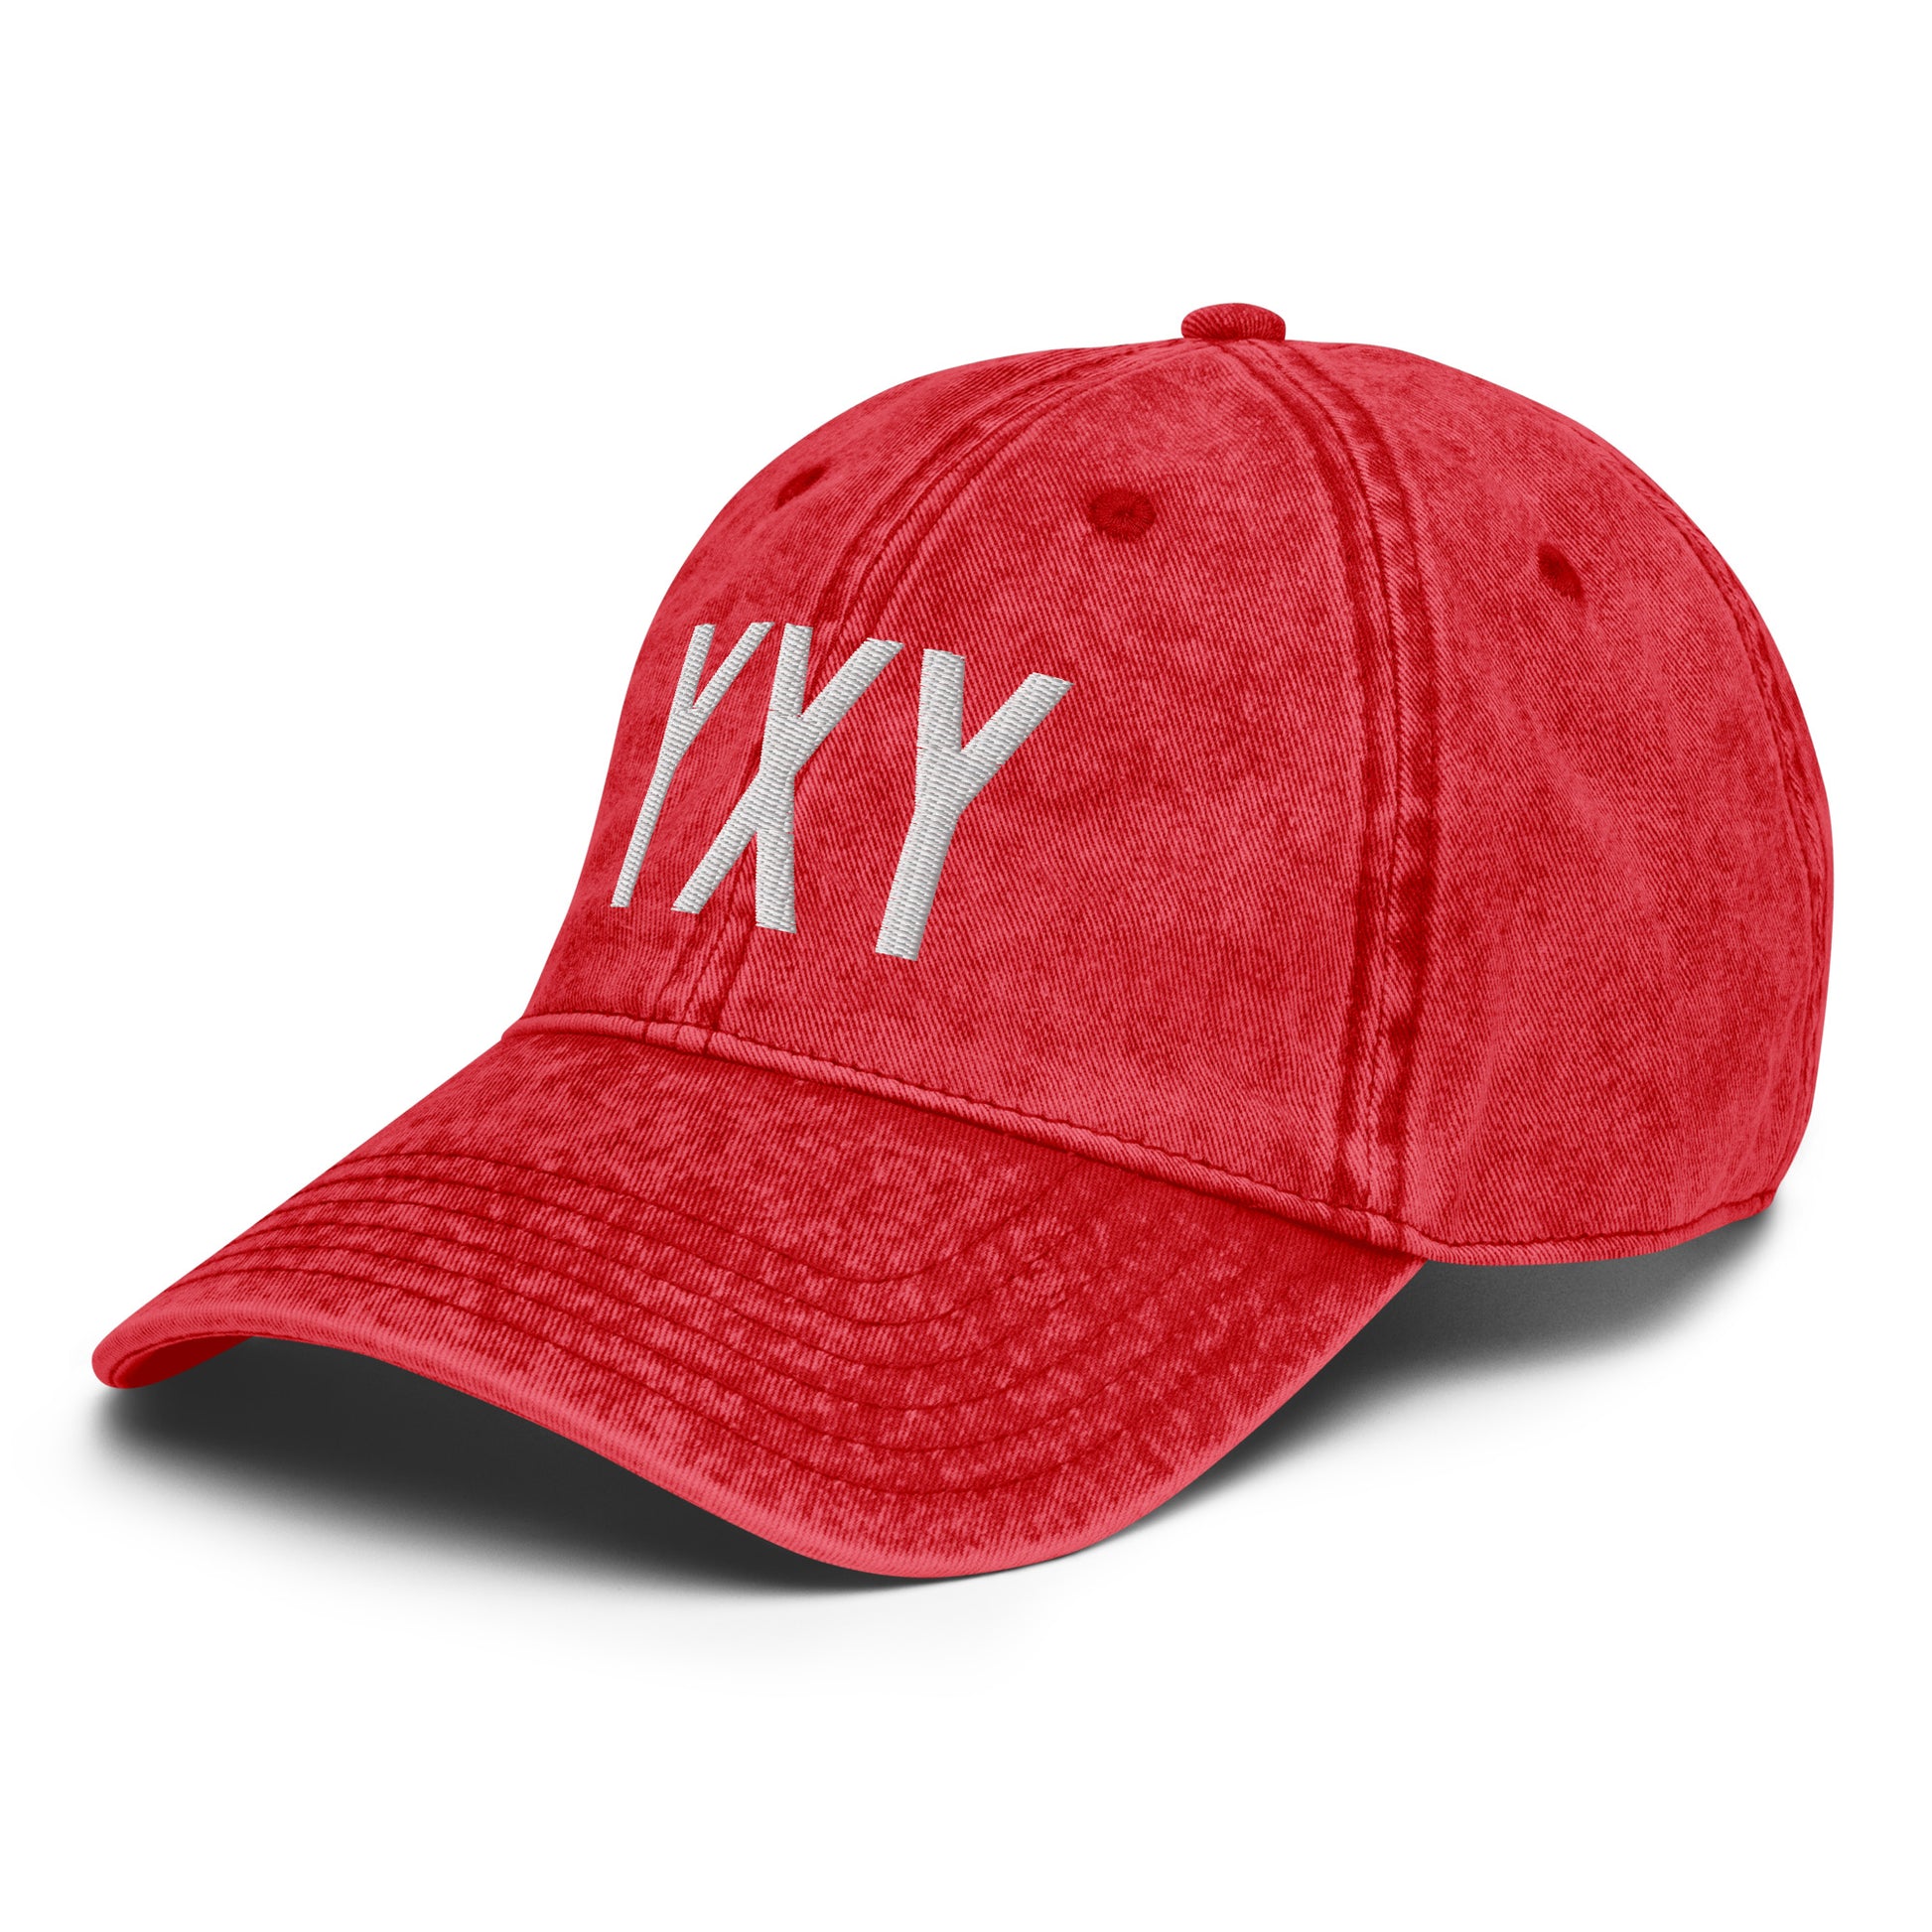 Airport Code Twill Cap - White • YXY Whitehorse • YHM Designs - Image 23